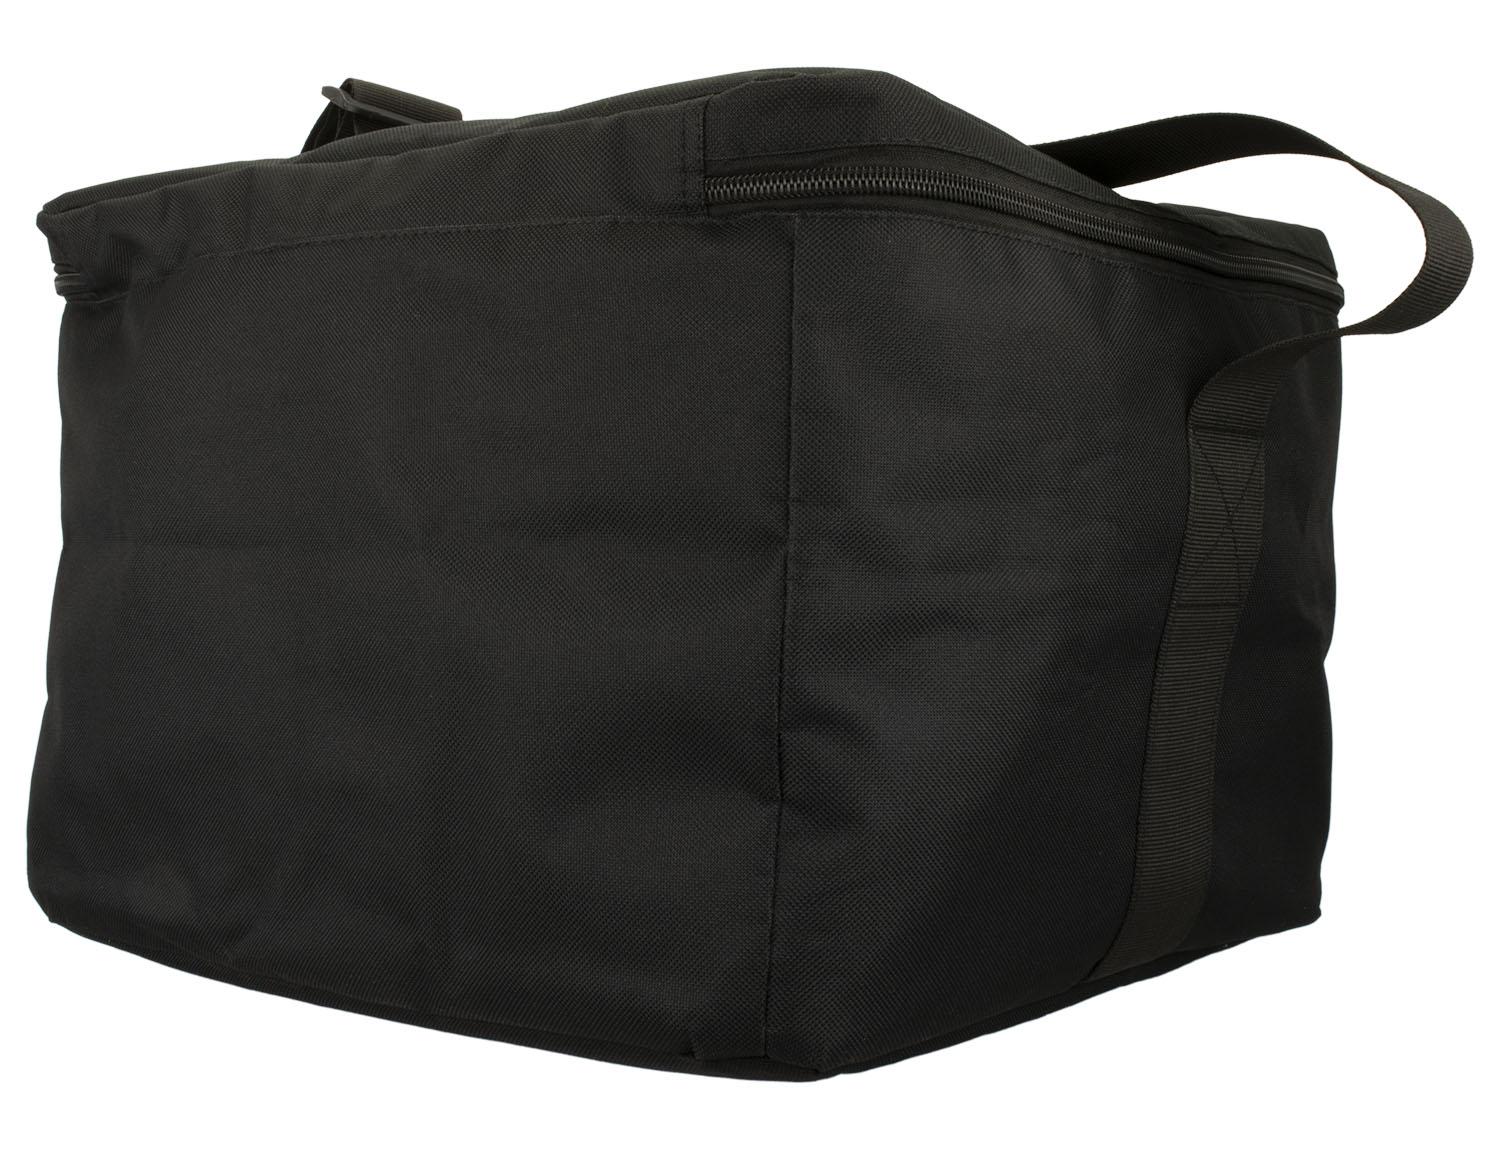 Cargo Organizer - Soft-Sided Cooler Bag W/Adjustable Carrying Strap ...